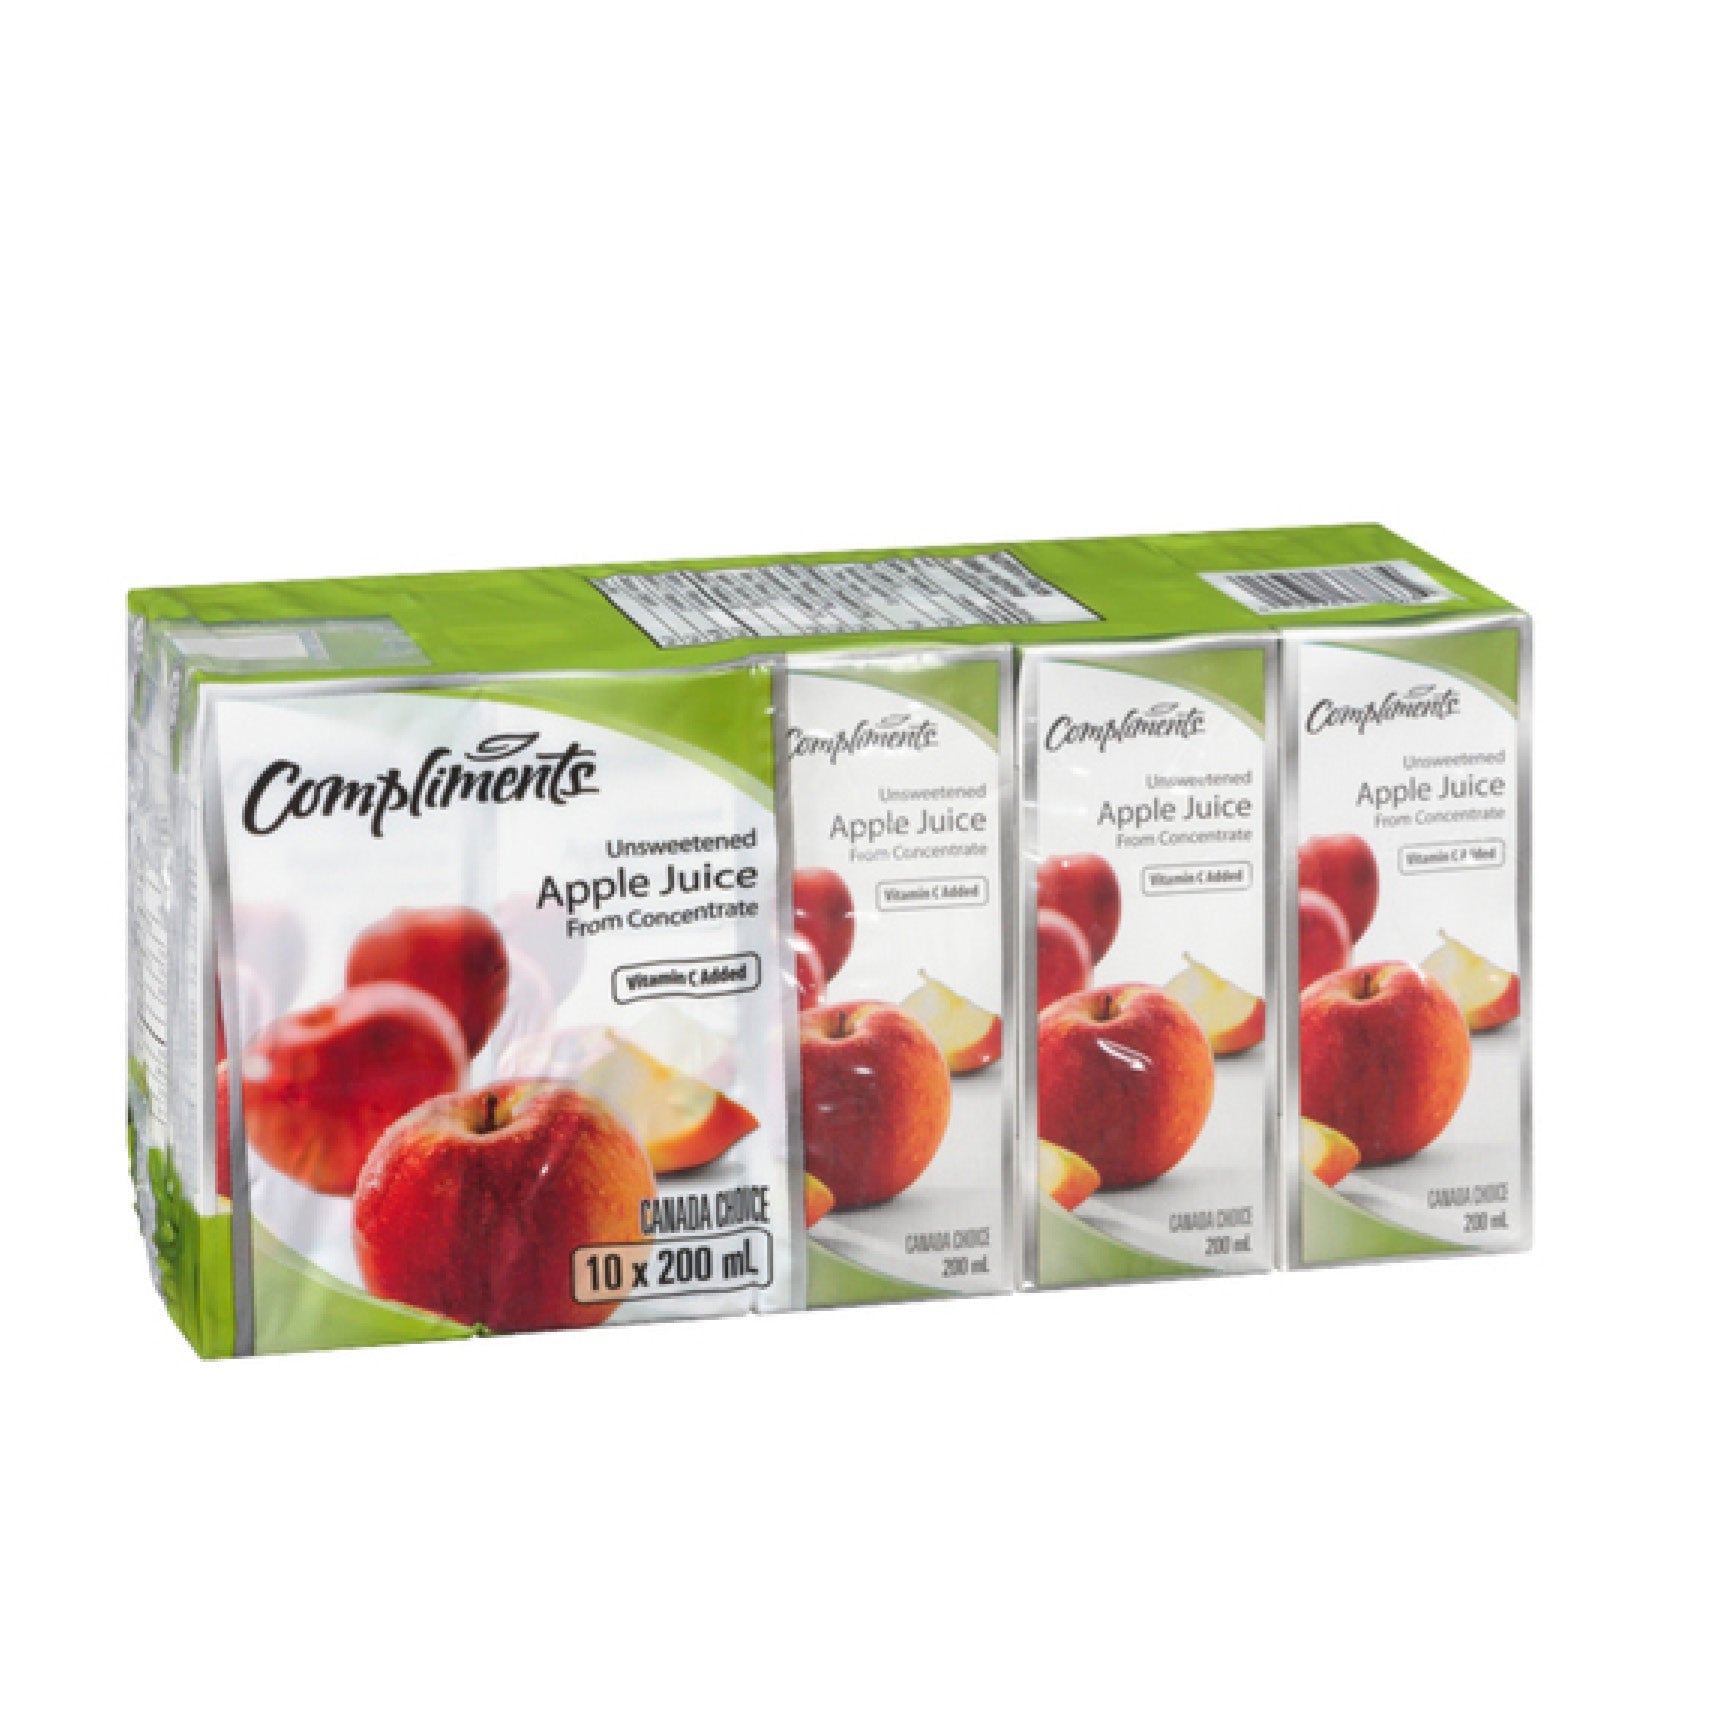 Compliments Apple Juice Boxes, No Sugar Added, 8x200ml